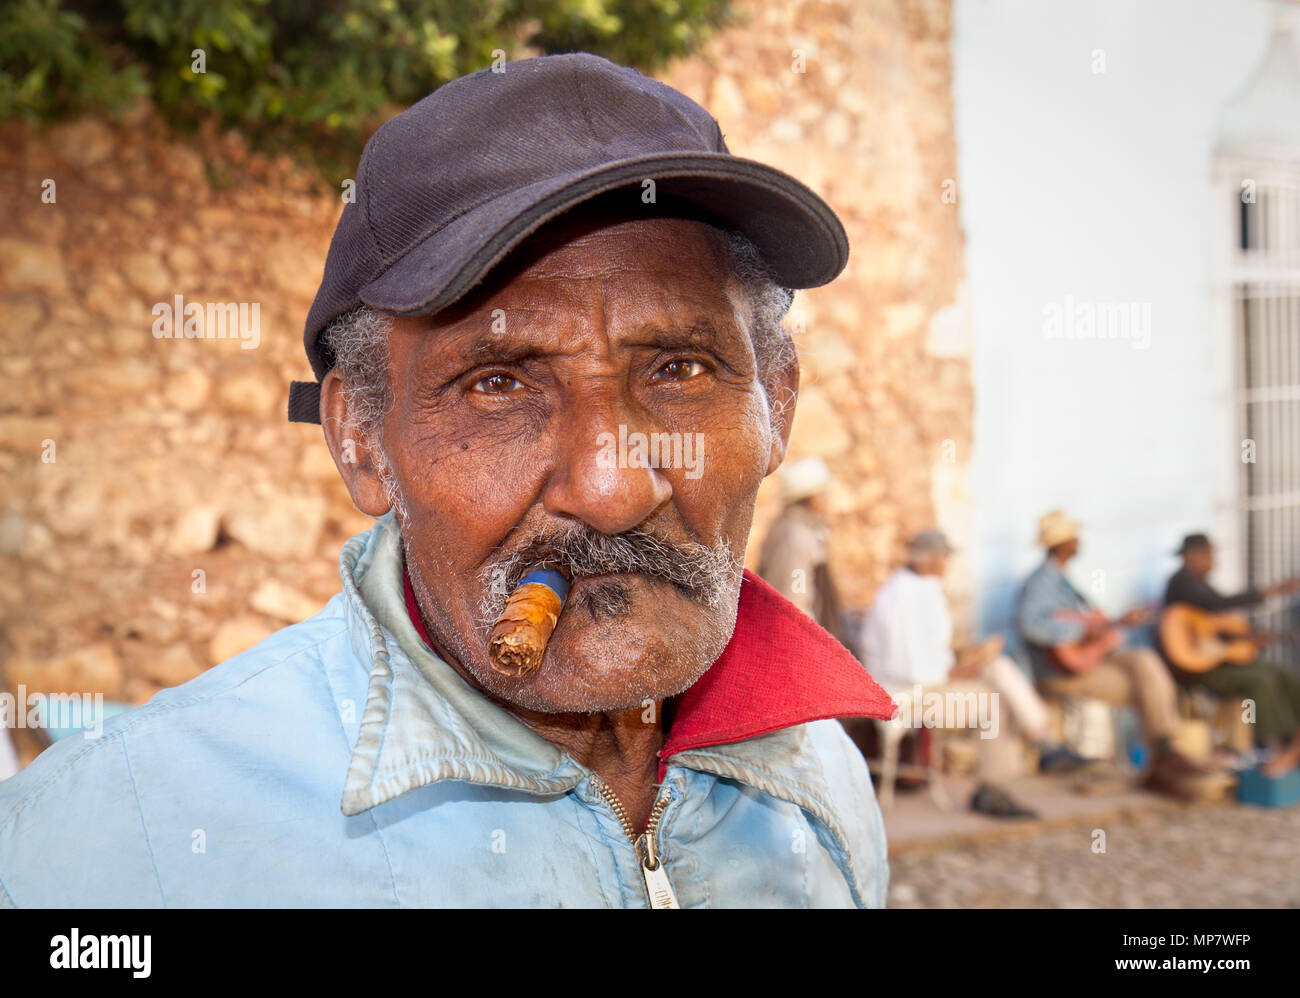 TRINIDAD,CUBA-JANUARY12:Unidentified Cubans smoking cigar on January 12. 2010.Trinidad,Cuba.Cubans of all ages are actively smoking cigars.All product Stock Photo